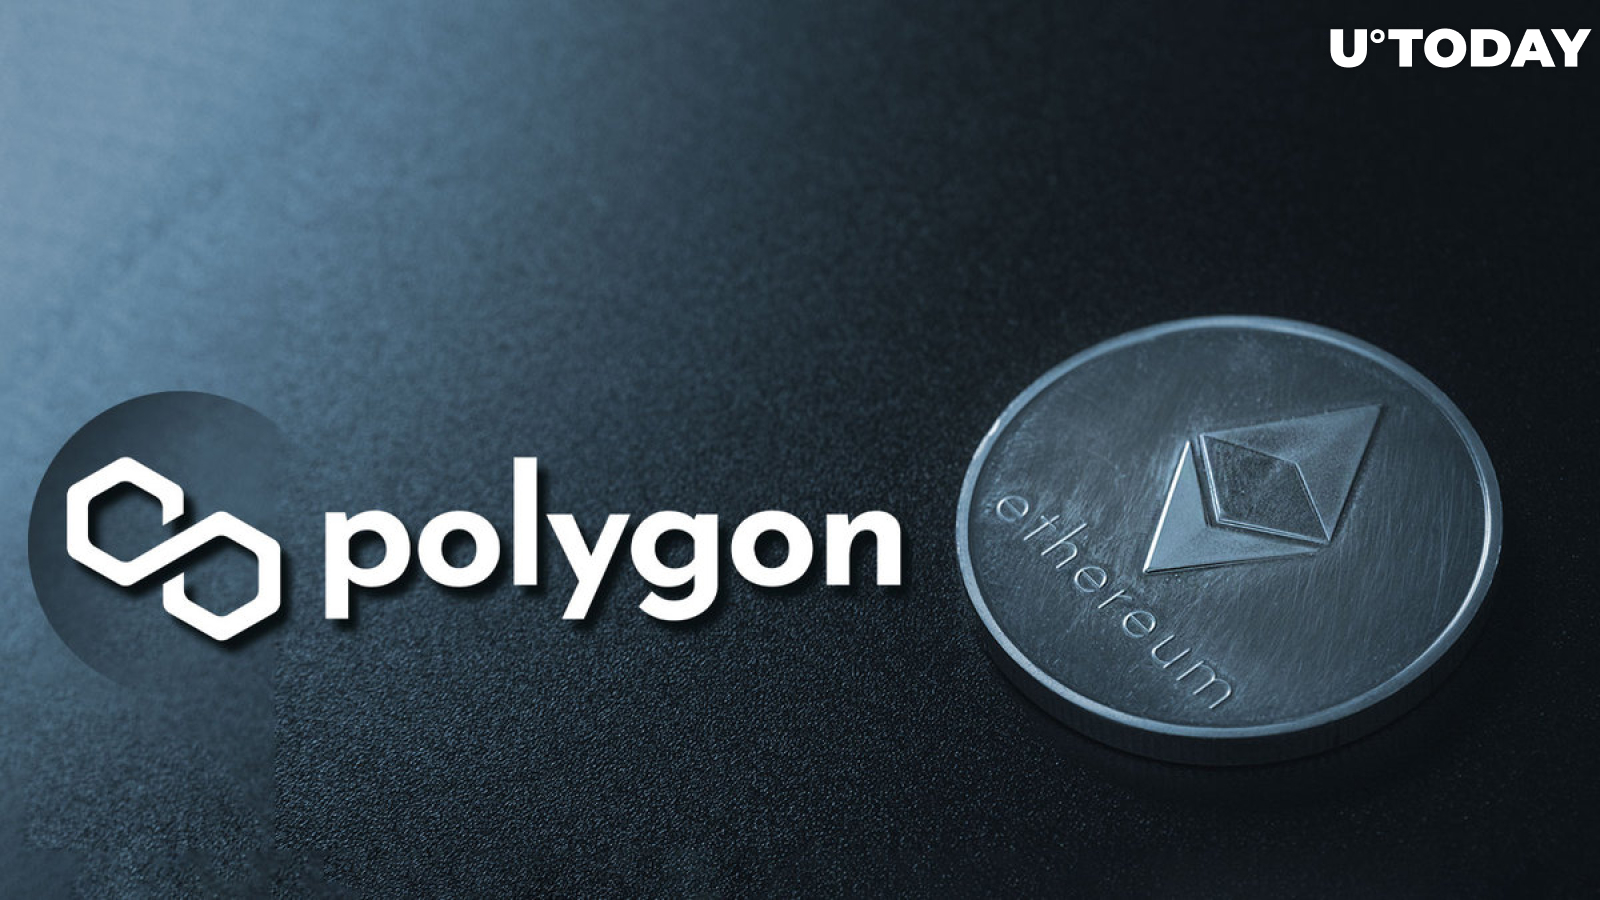 Polygon Co-founder Confirms Date for Ethereum Scaling Solution Mainnet Launch